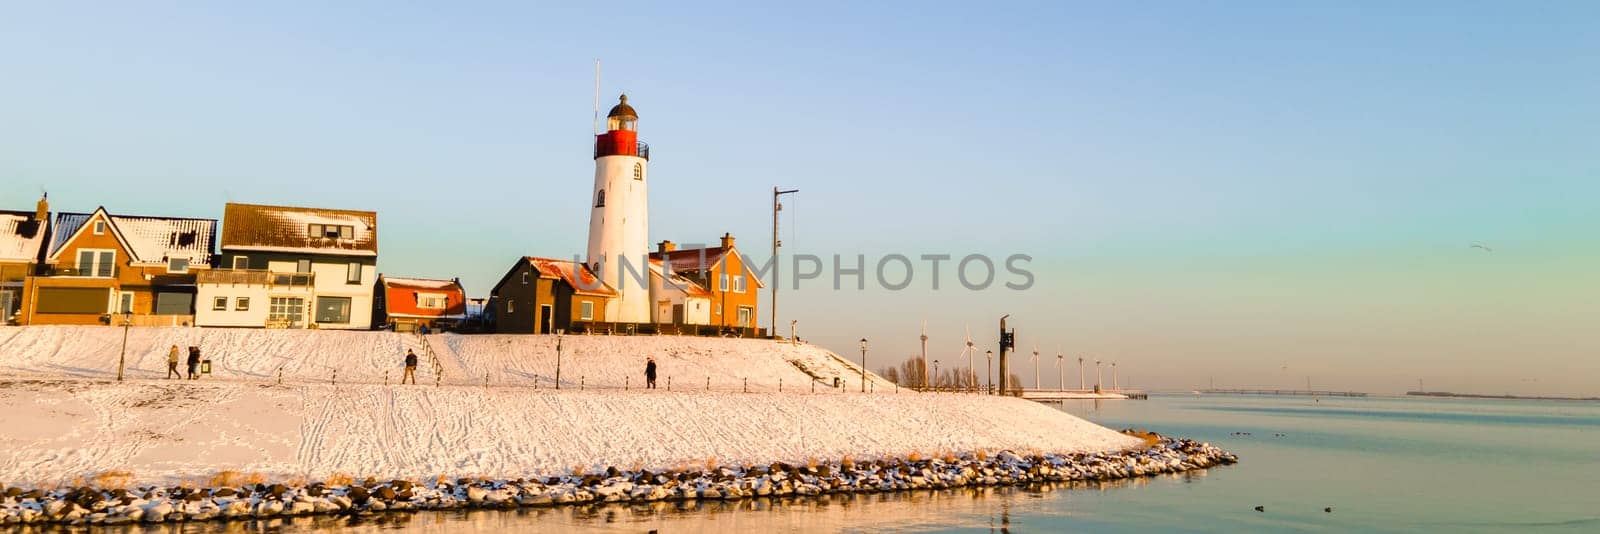 Lighthouse of Urk Netherlands during sunset in the Netherlands during winter with snow white landscape